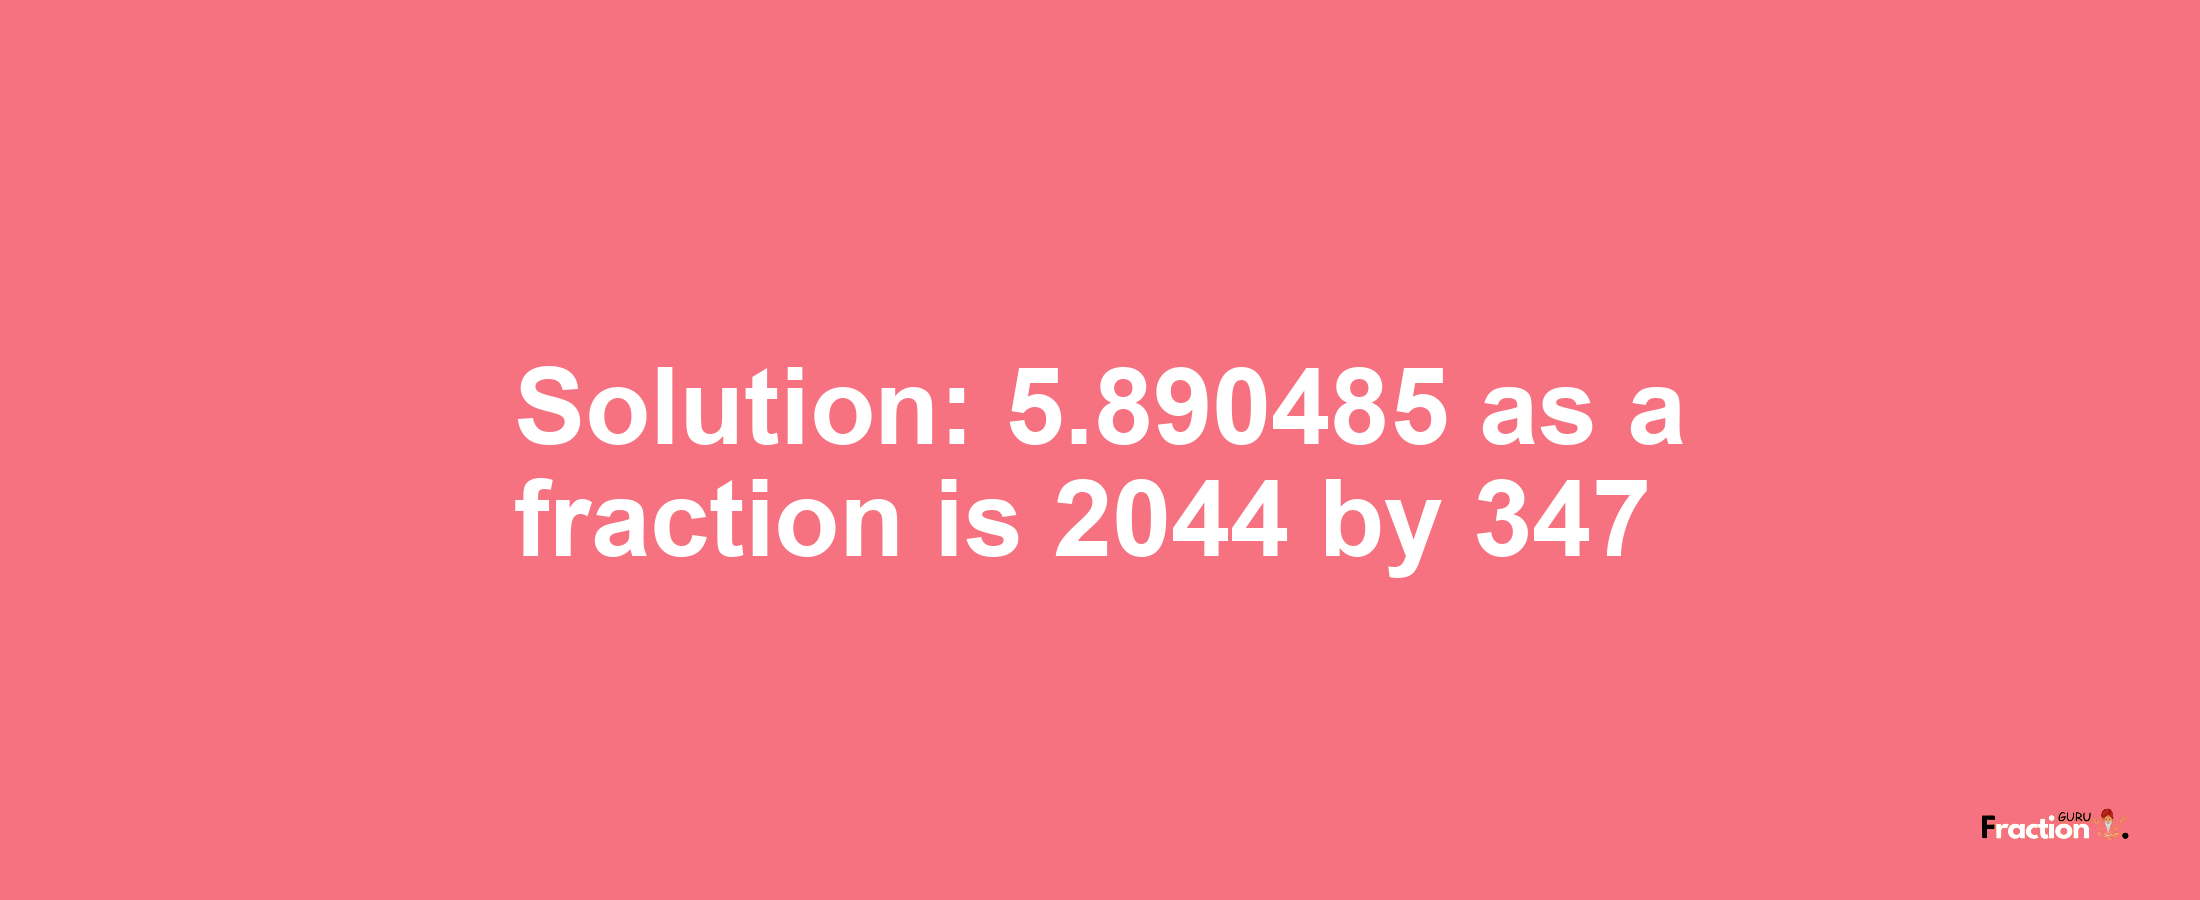 Solution:5.890485 as a fraction is 2044/347